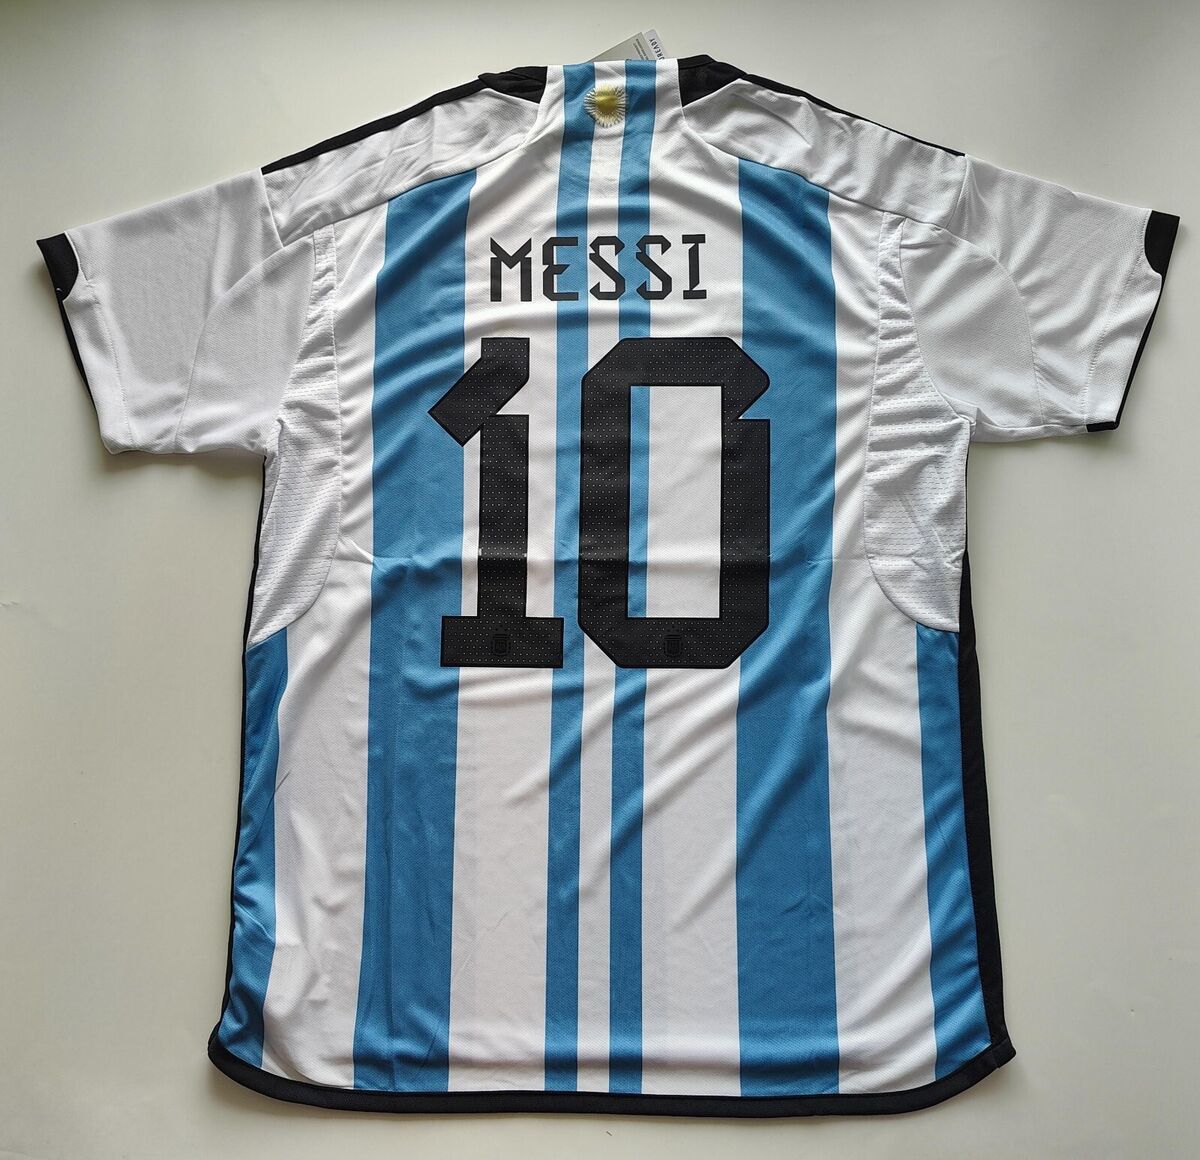 messi jersey